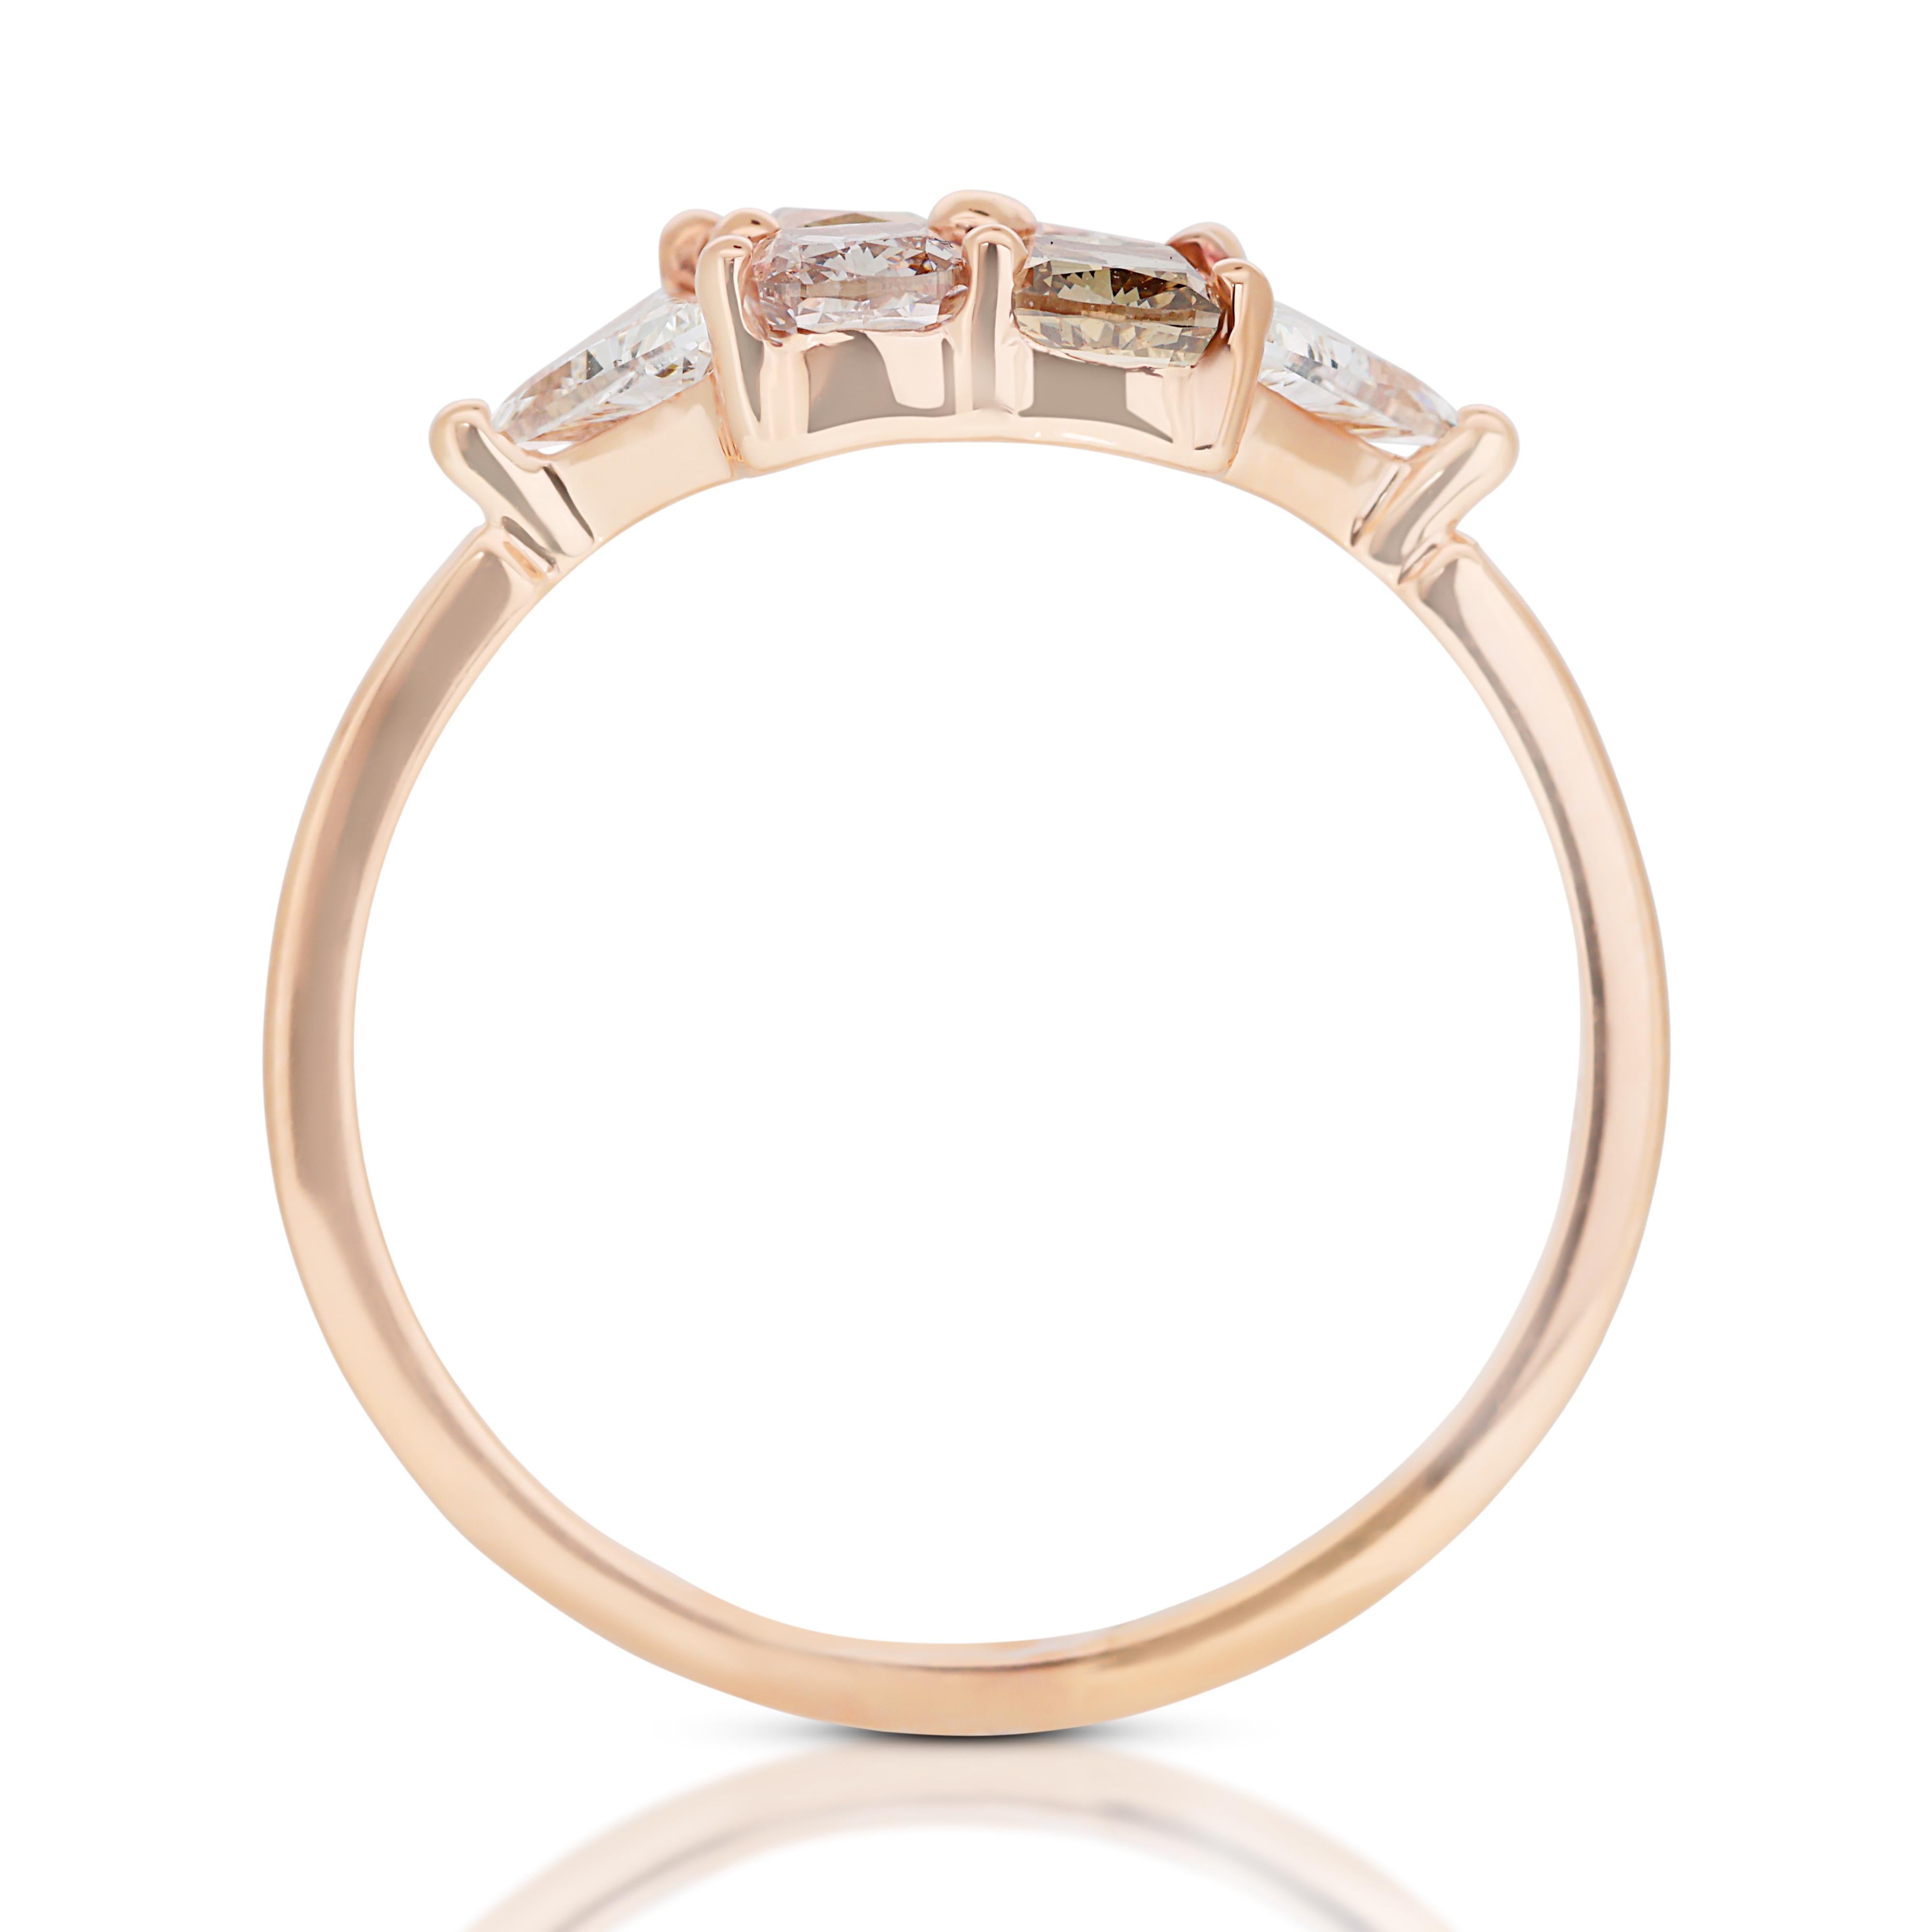 Vibrant One-of-a-Kind 14k Rose Gold Fancy-Colored Diamond Ring w/1.31 ct  For Sale 2